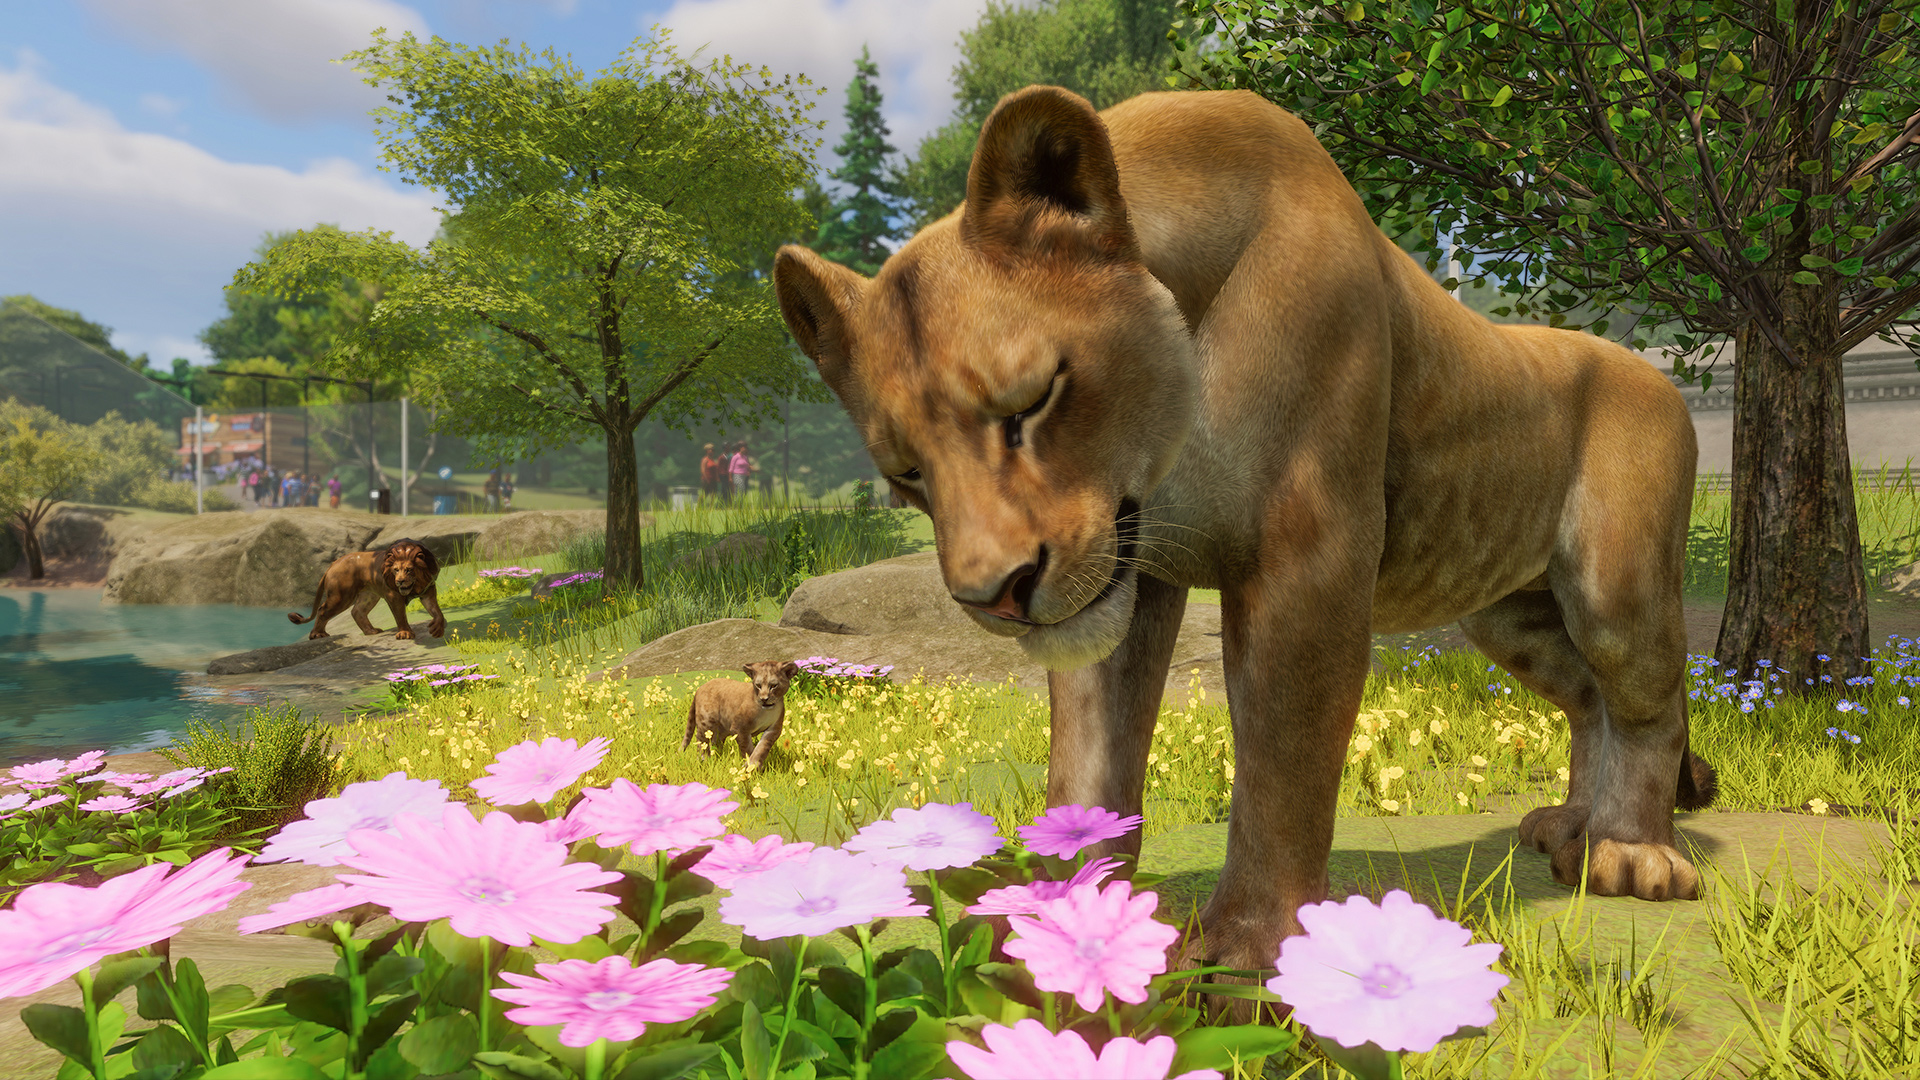 Planet Zoo iOS/APK Full Version Free Download